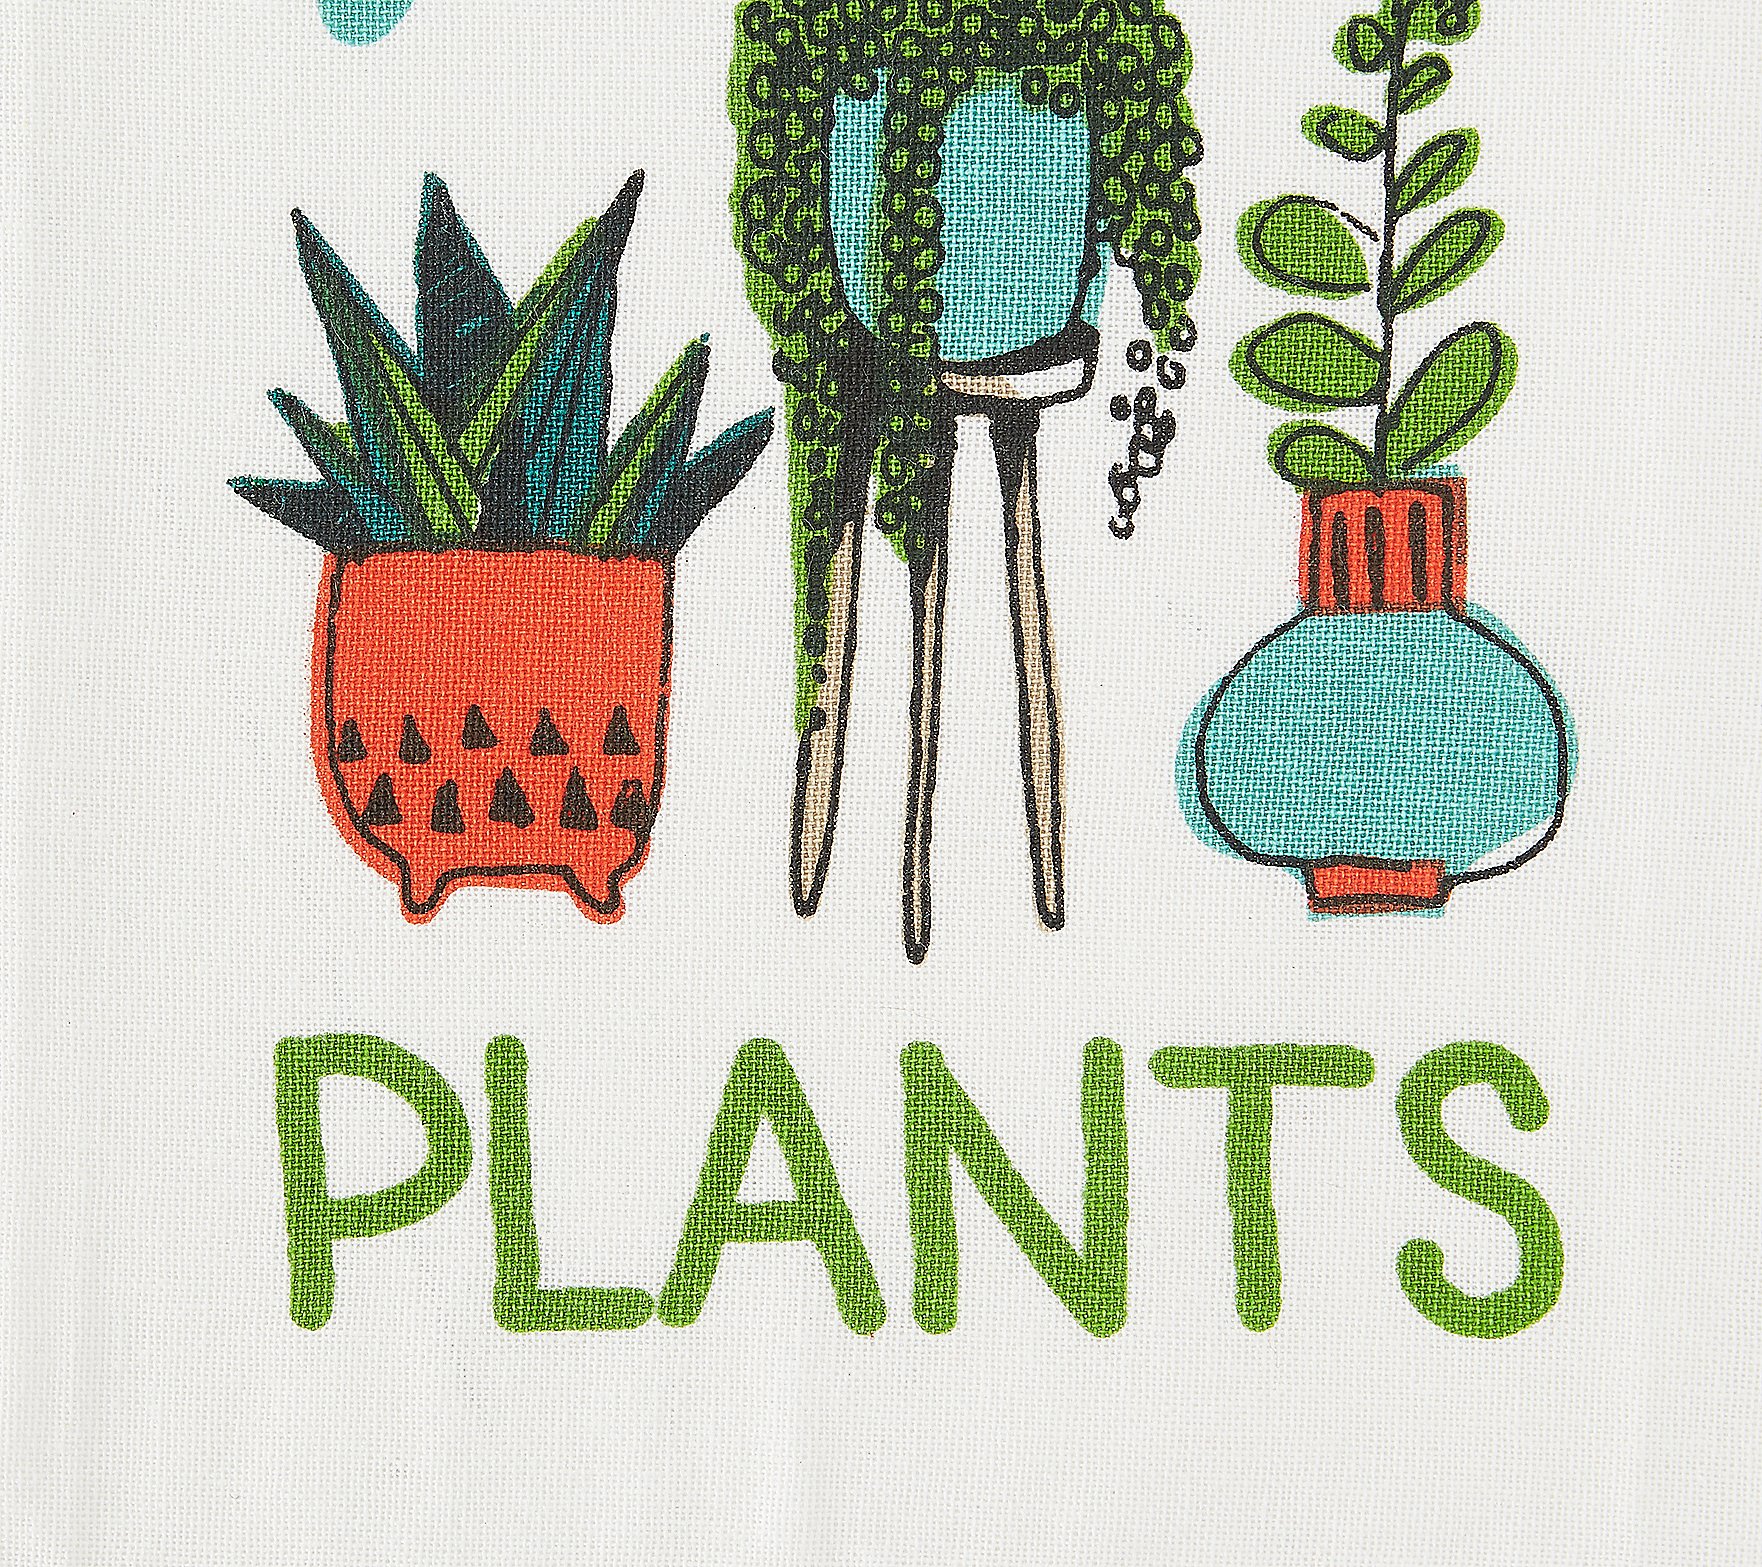 Design Imports Set of 3 Hey There Fancy Plants Kitchen Towels